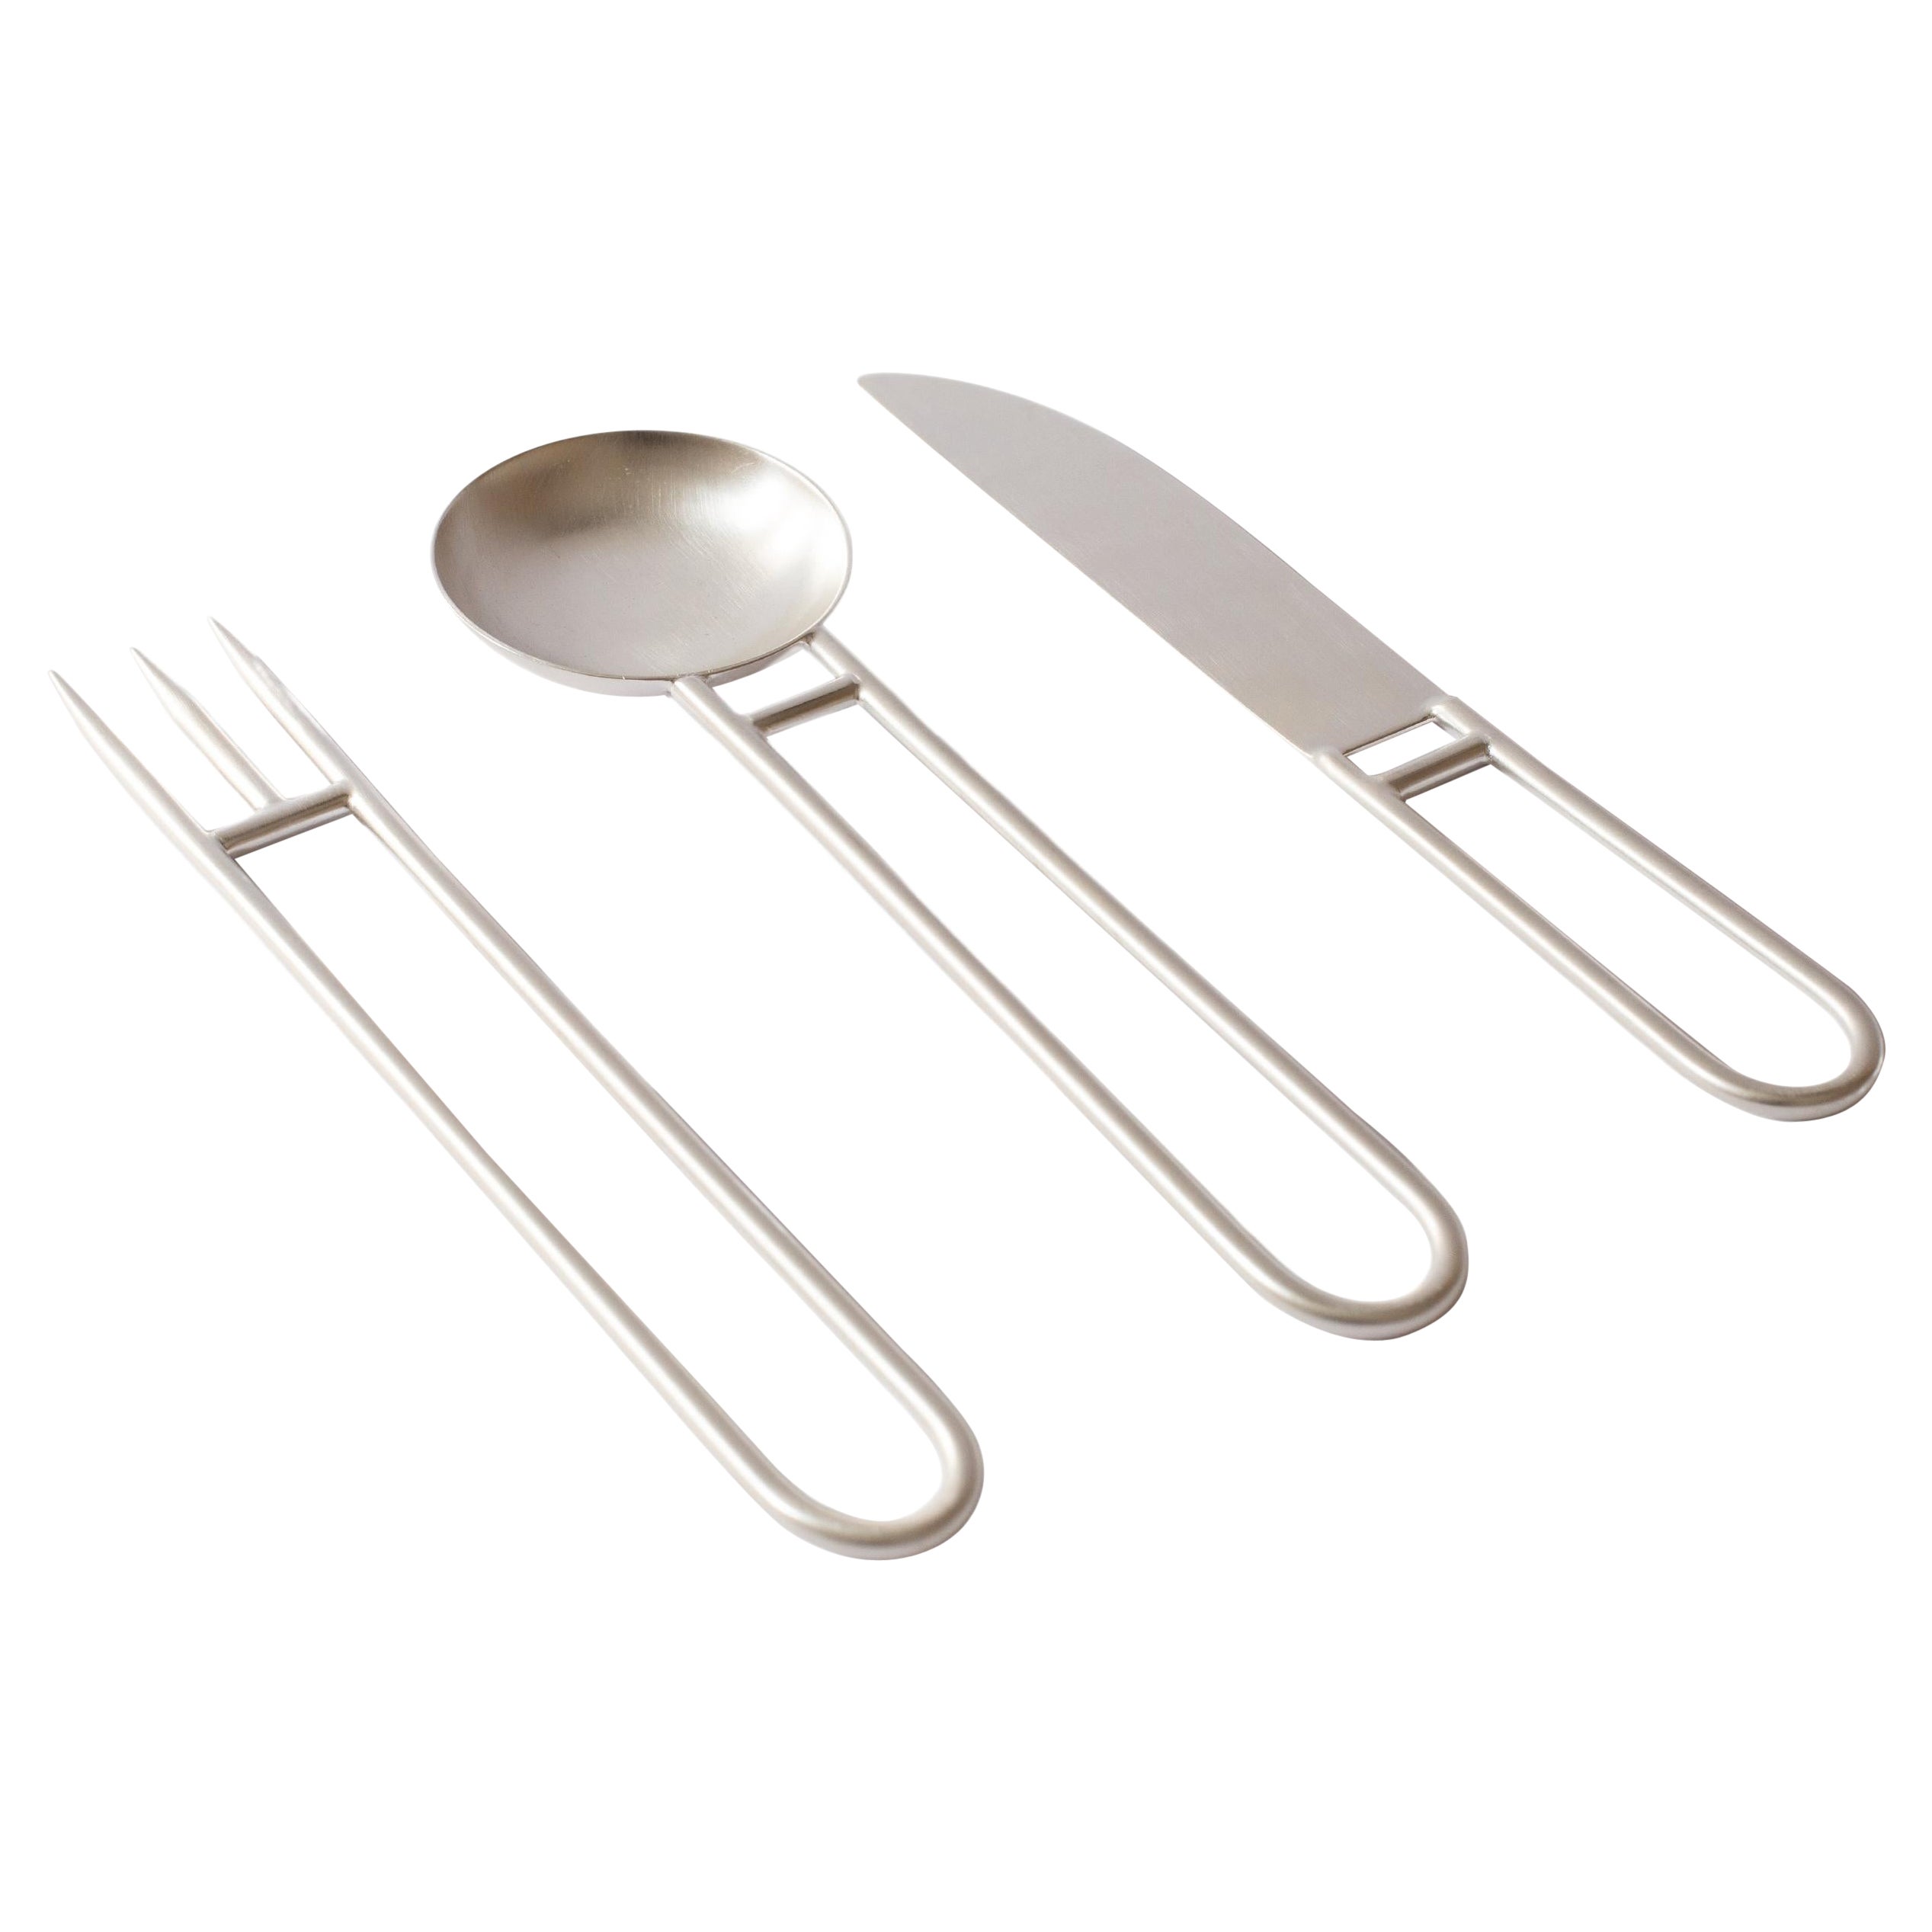 Contemporary Cutlery Silver Plated Set Handcrafted in Italy by Natalia Criado For Sale